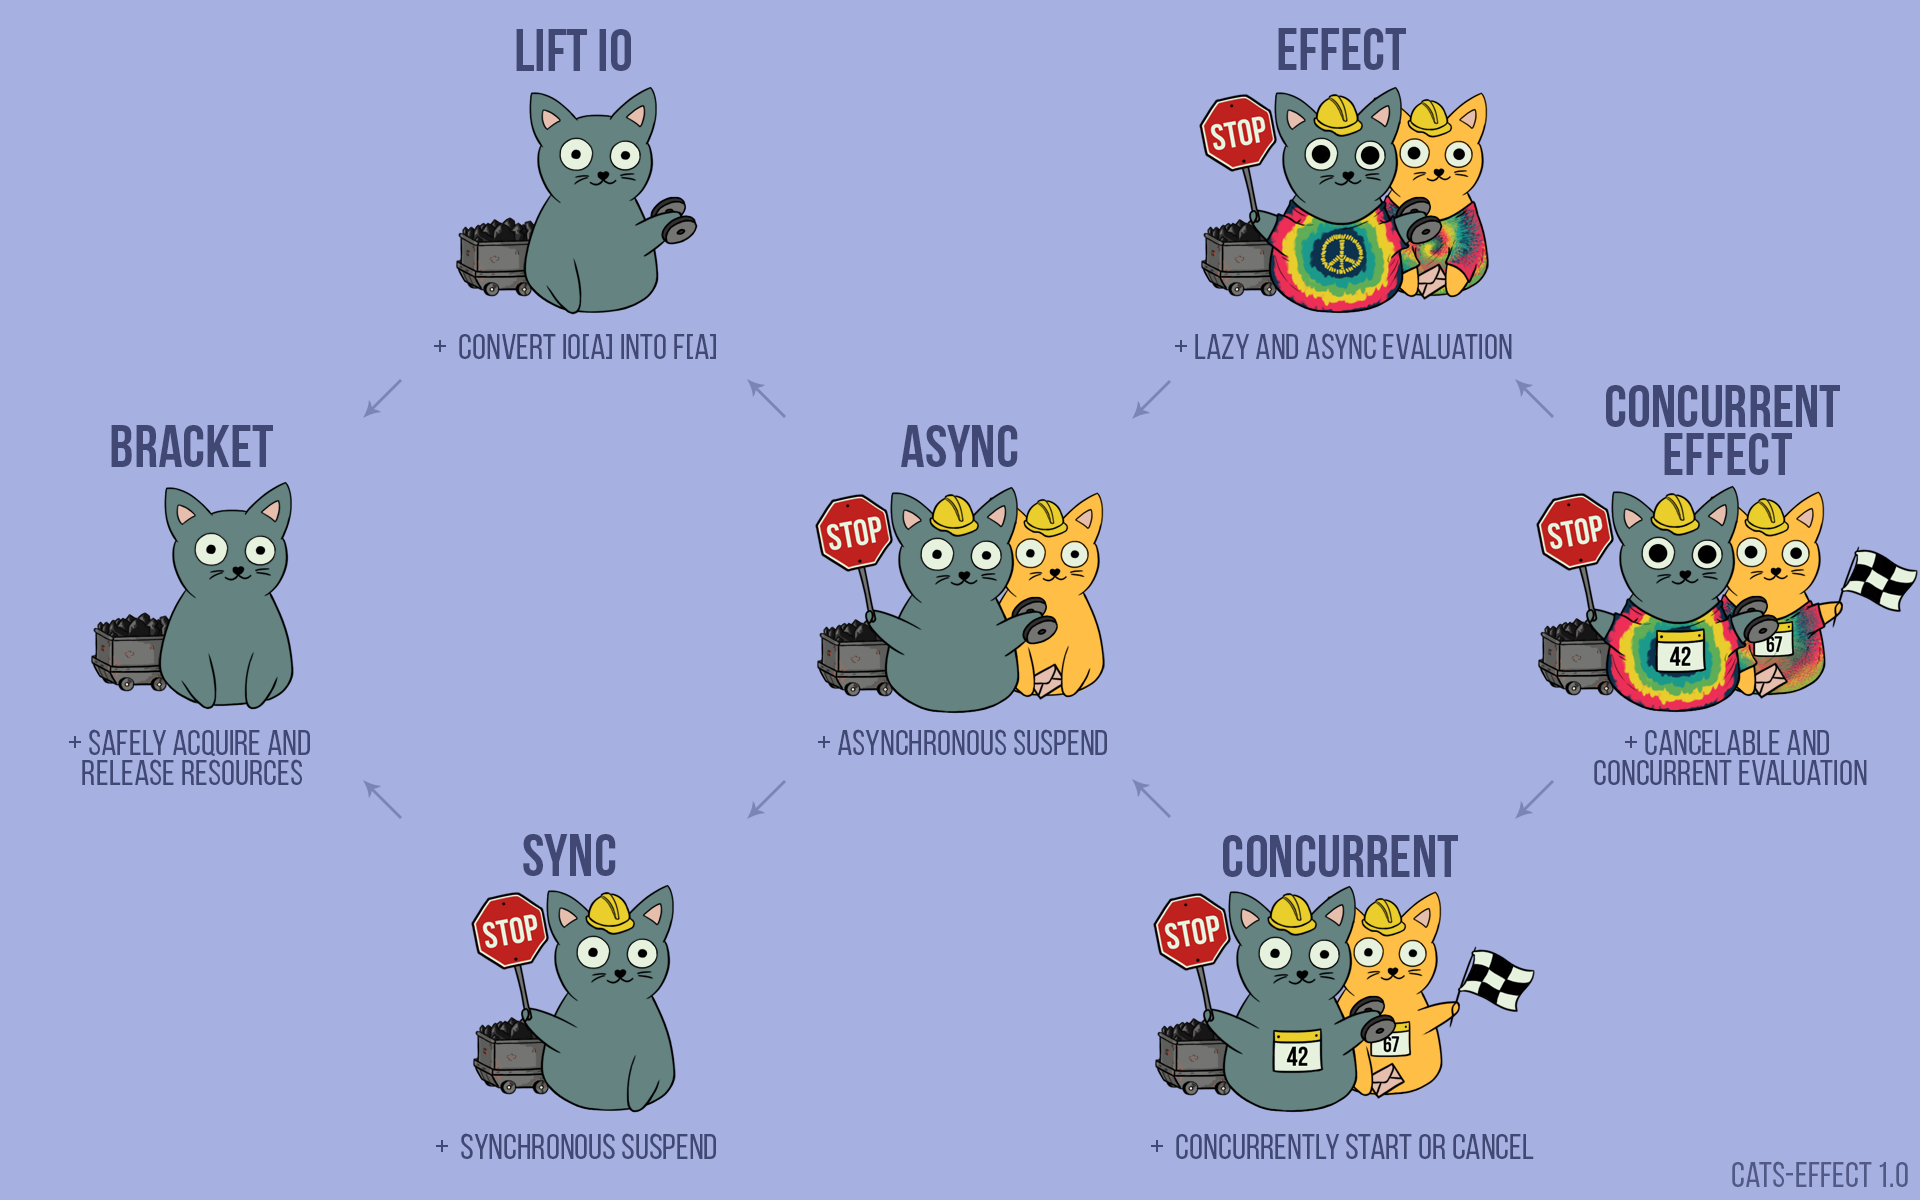 More on cats and effects below.